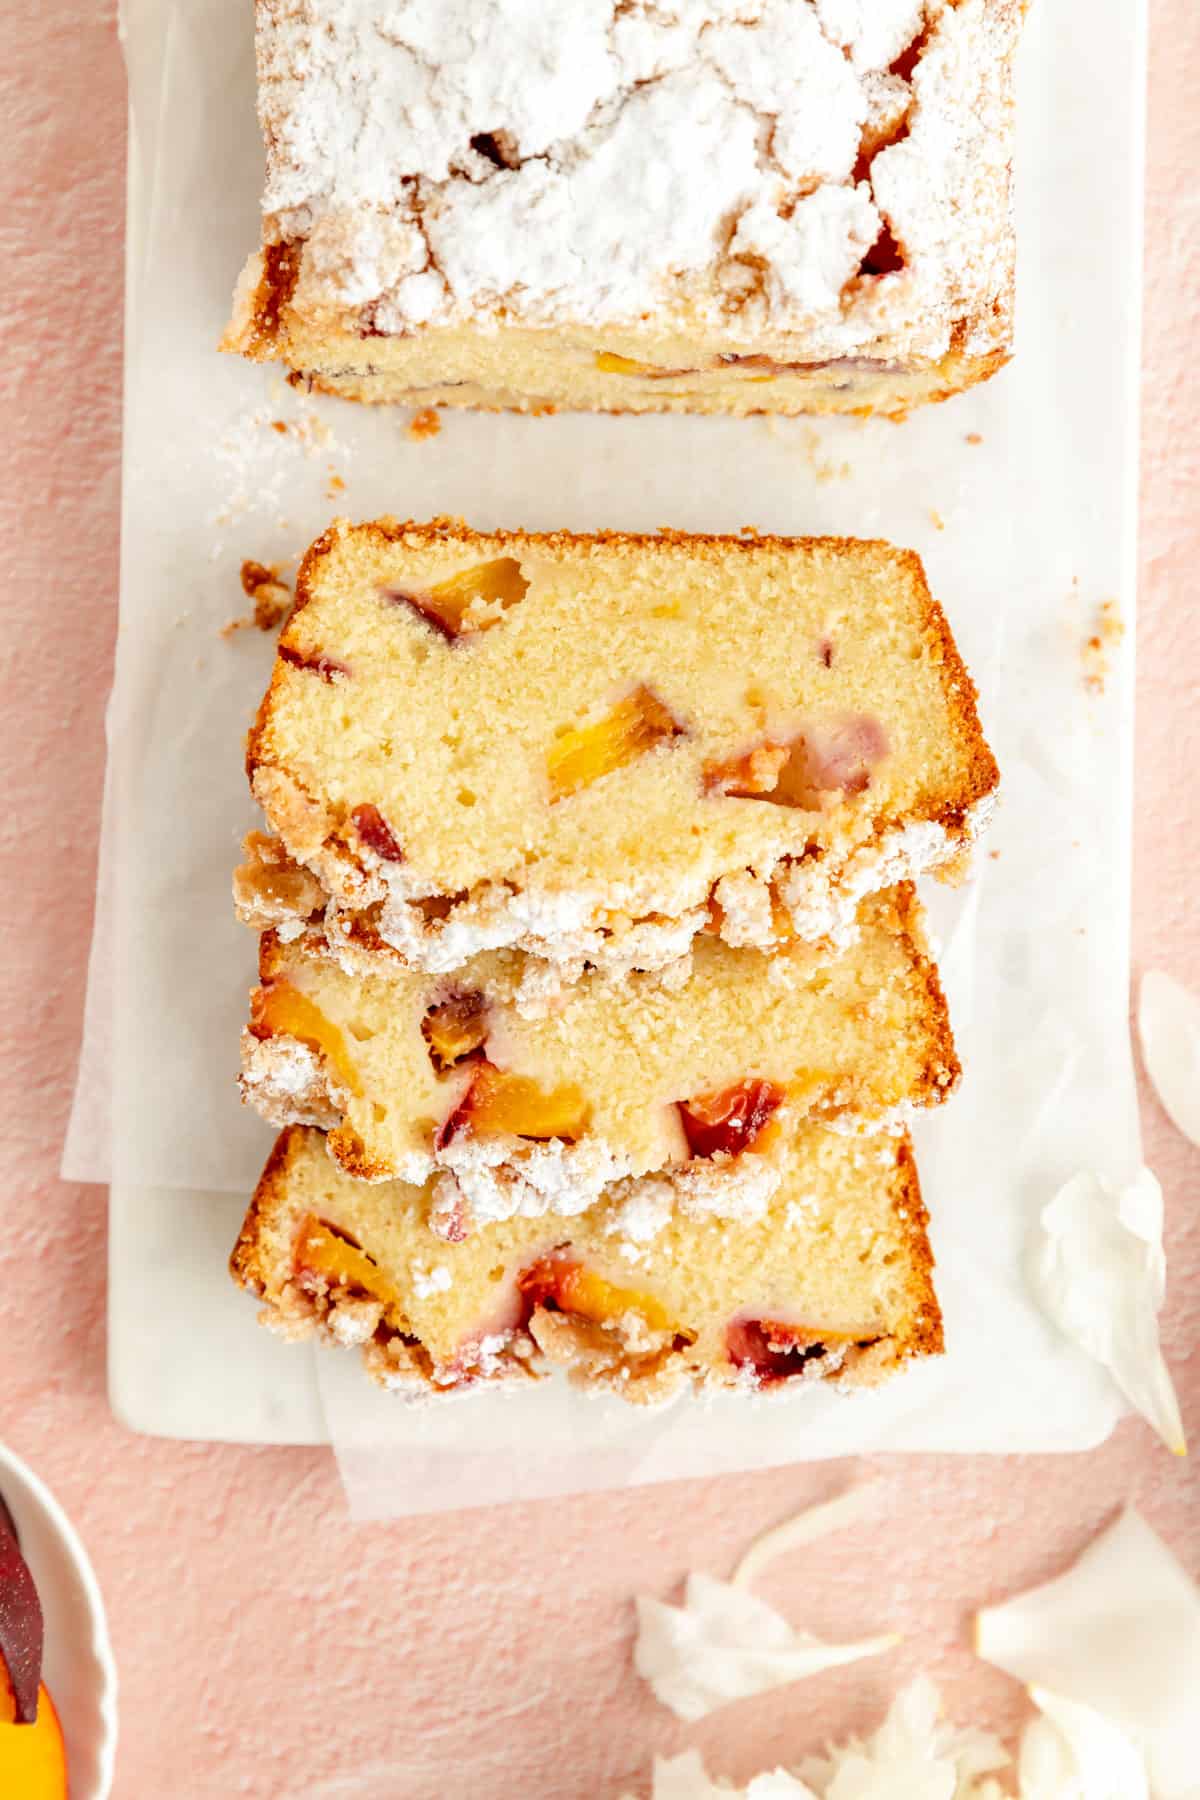 peach cobbler pound cake sliced on white board dusted with powdered sugar from overhead.